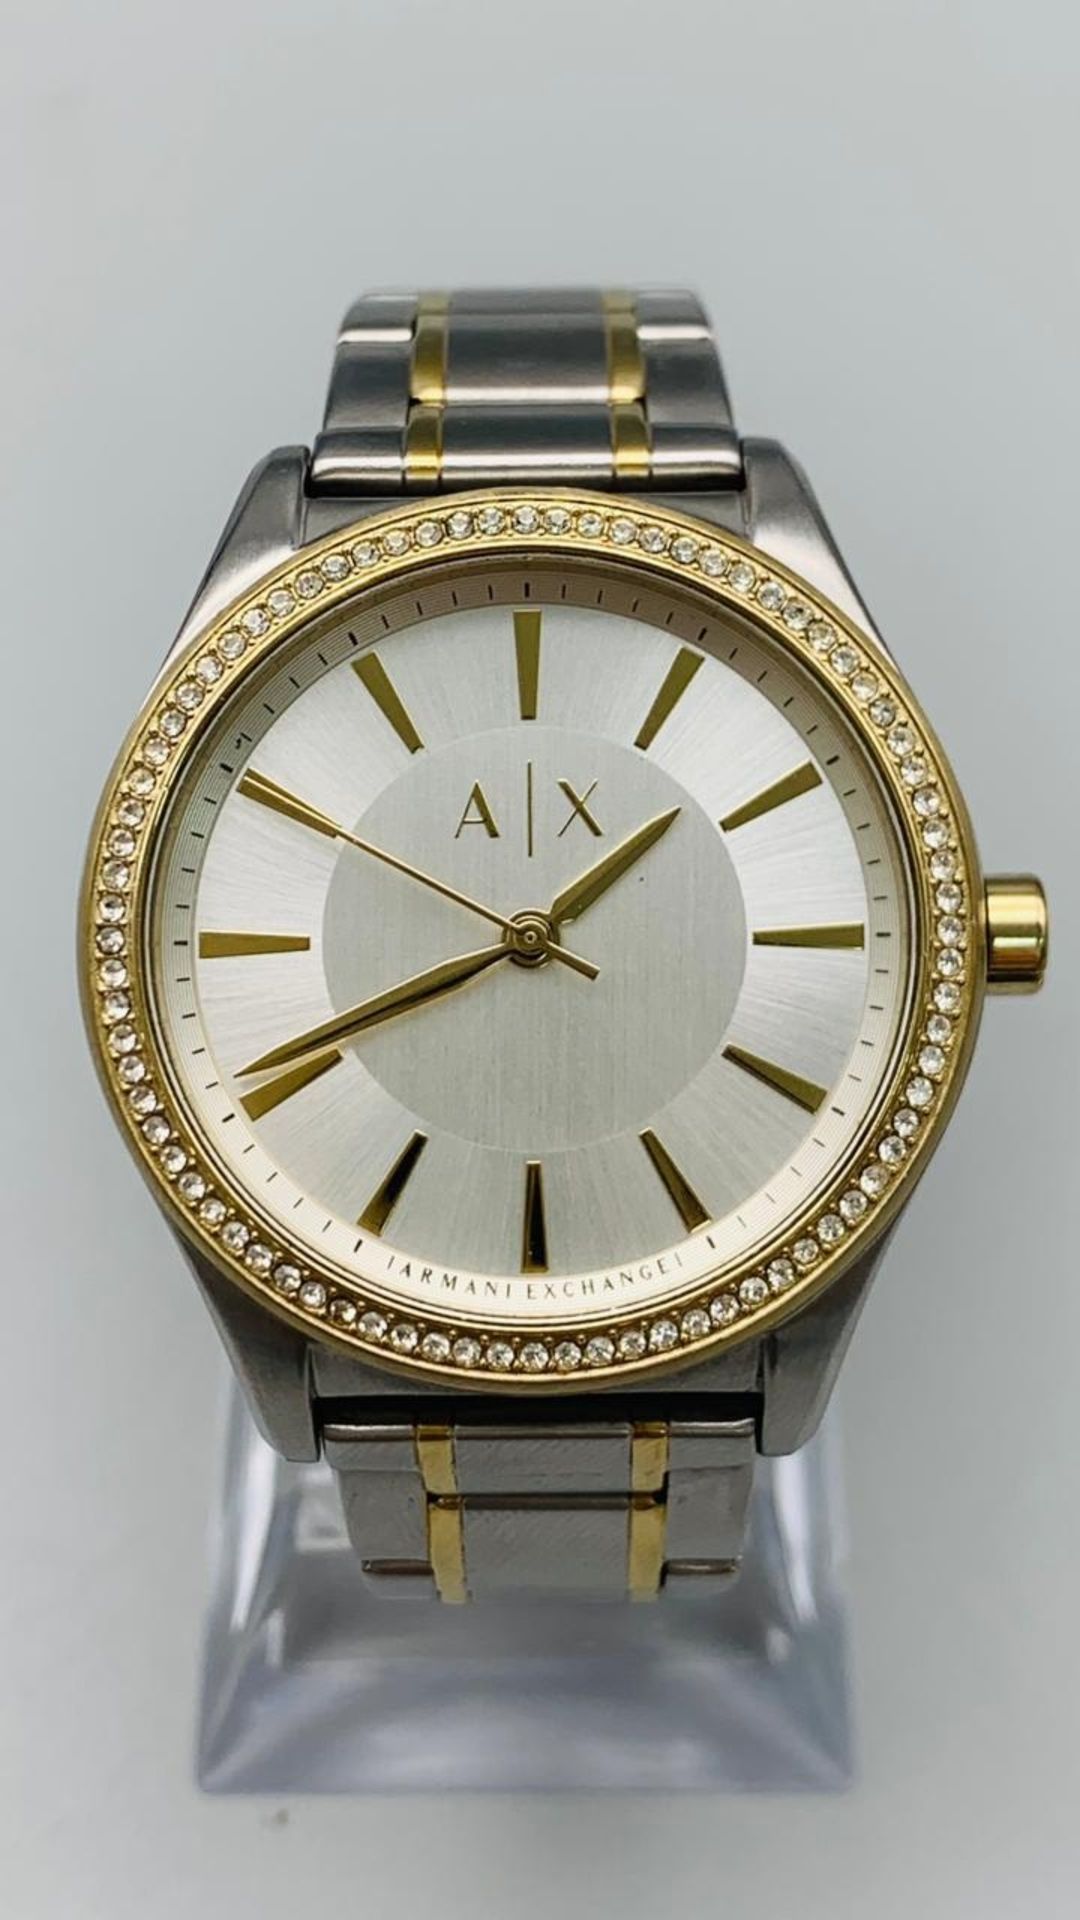 ARMANI EXCHANGE 2 TONE BRACELET WATCH AX MODEL AX5446. FULL WORKING ORDER, EXCELLENT CONDITION. 38MM